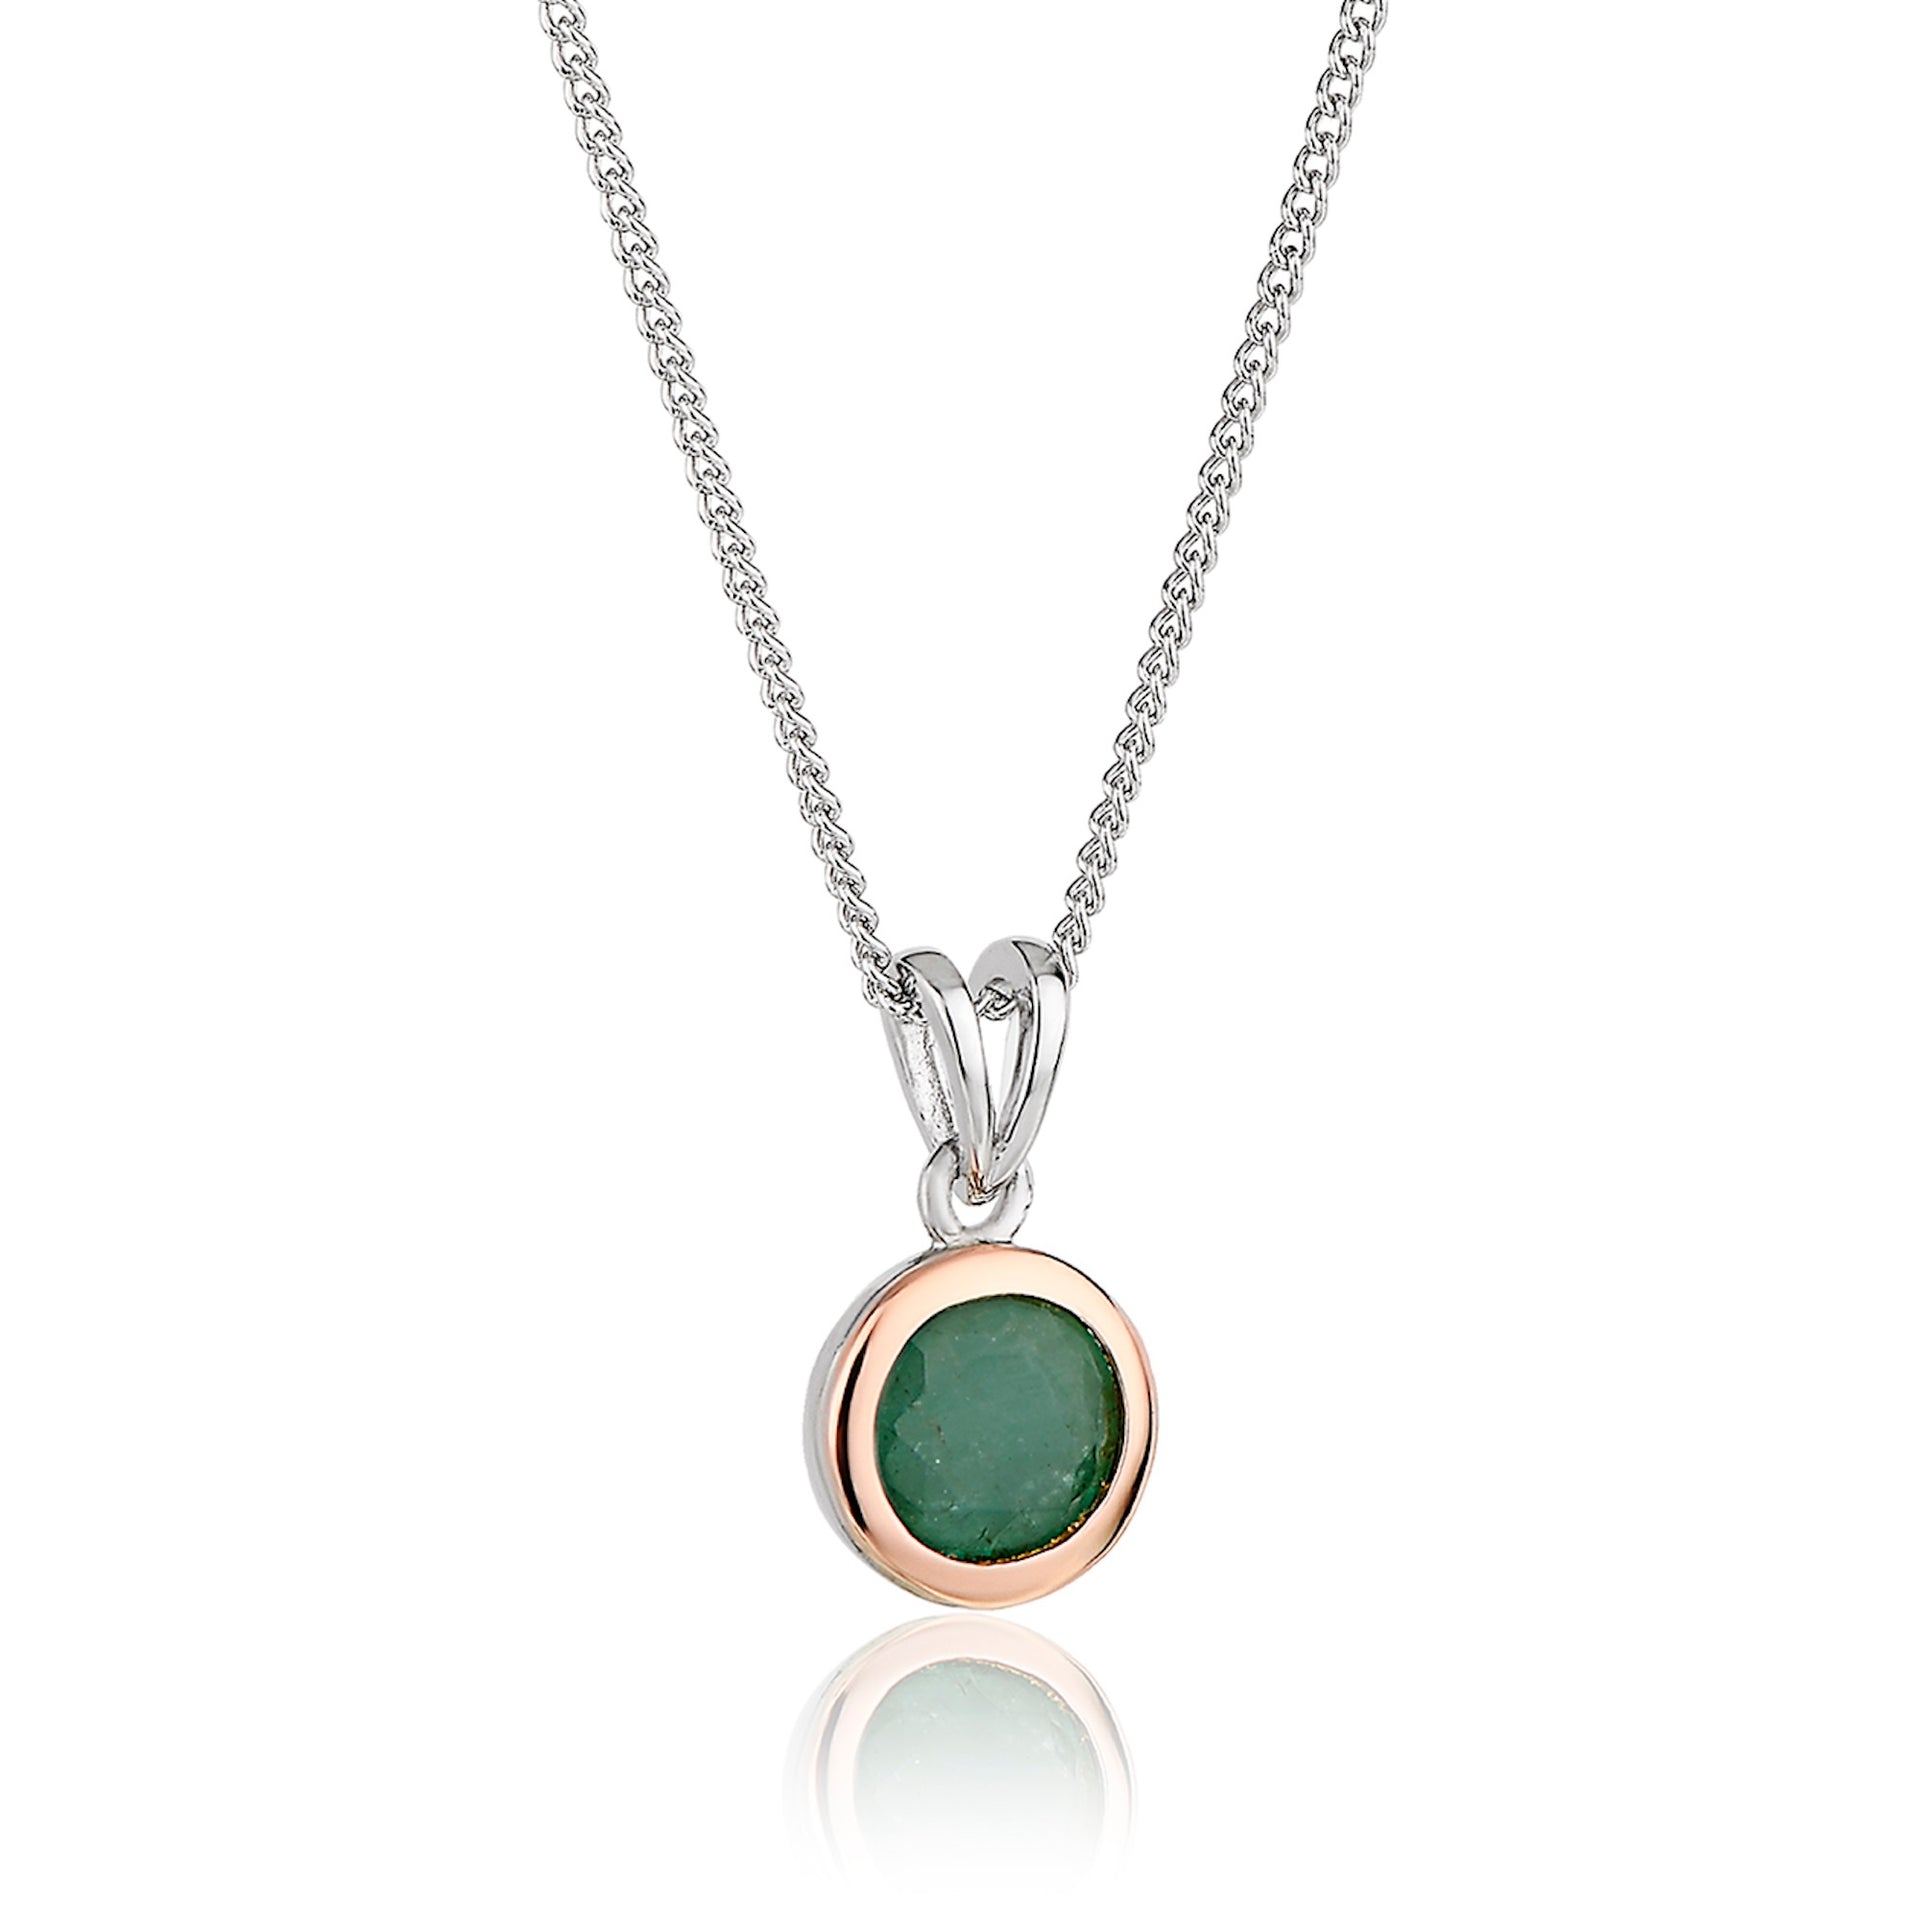 Birthstone Silver and Emerald Pendant – May